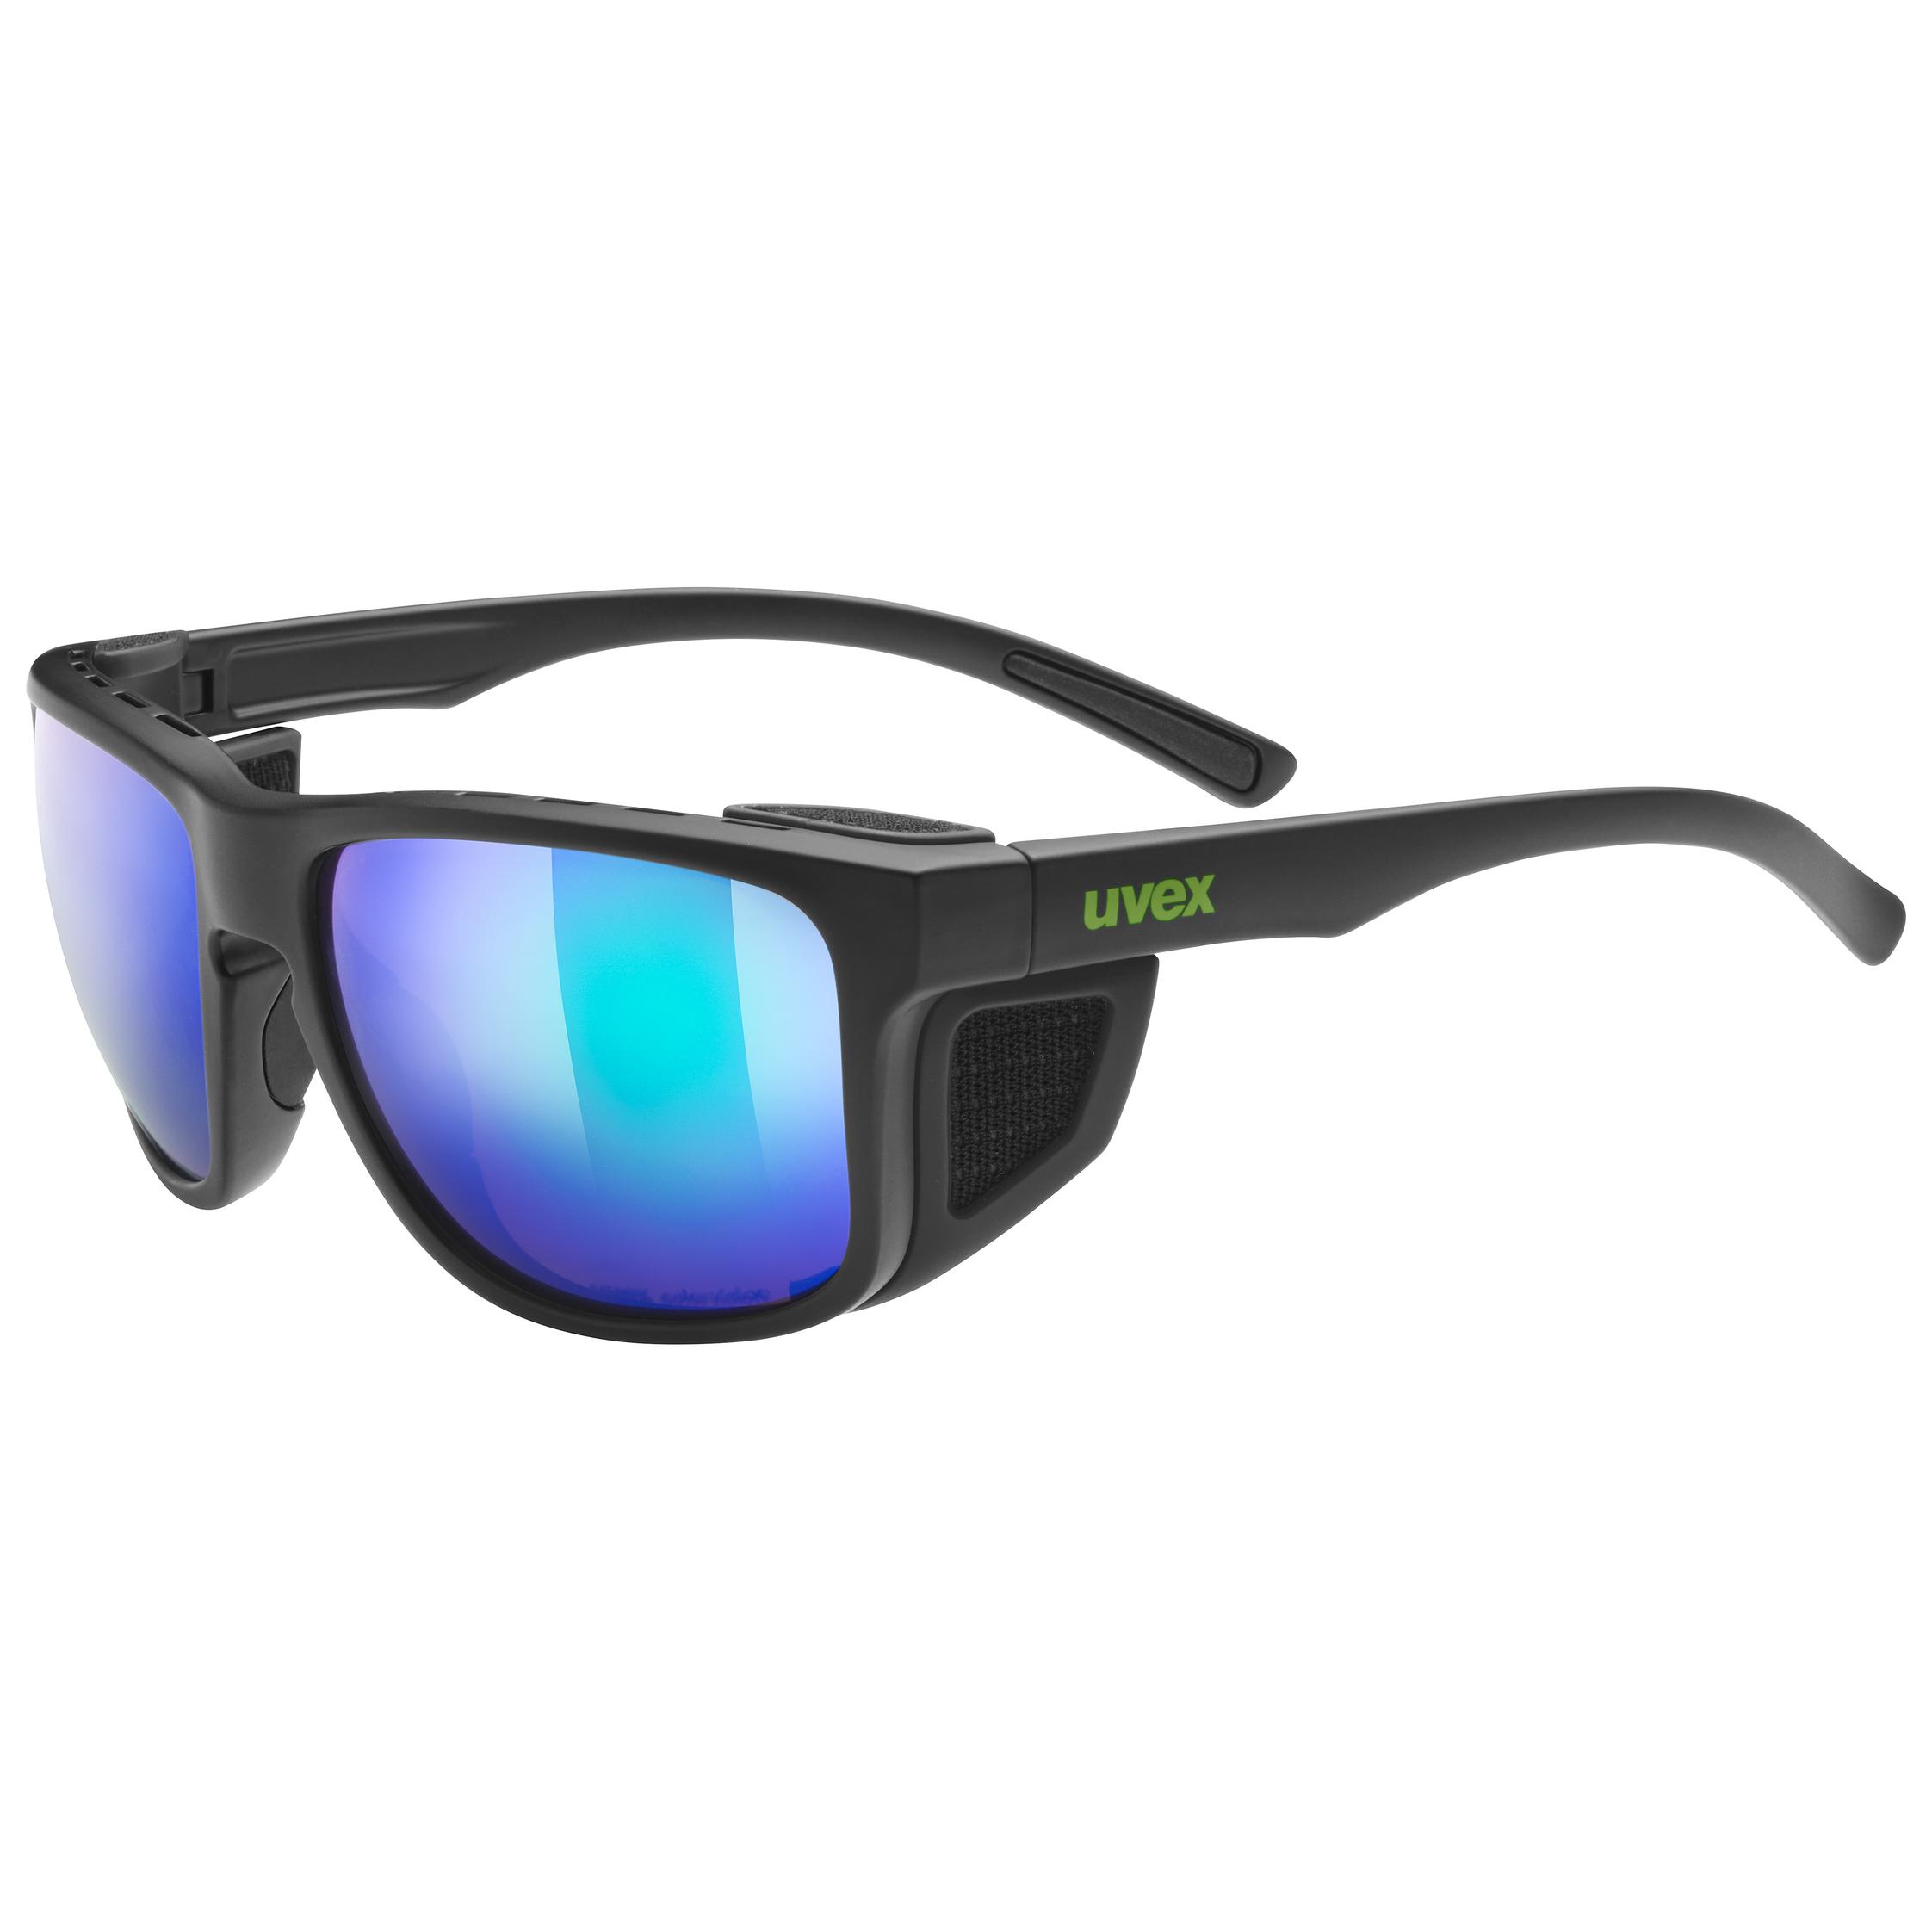 Black/S... 3 Lens + Case Uvex Gravic Sports Interchangeable Cycling Sunglasses 